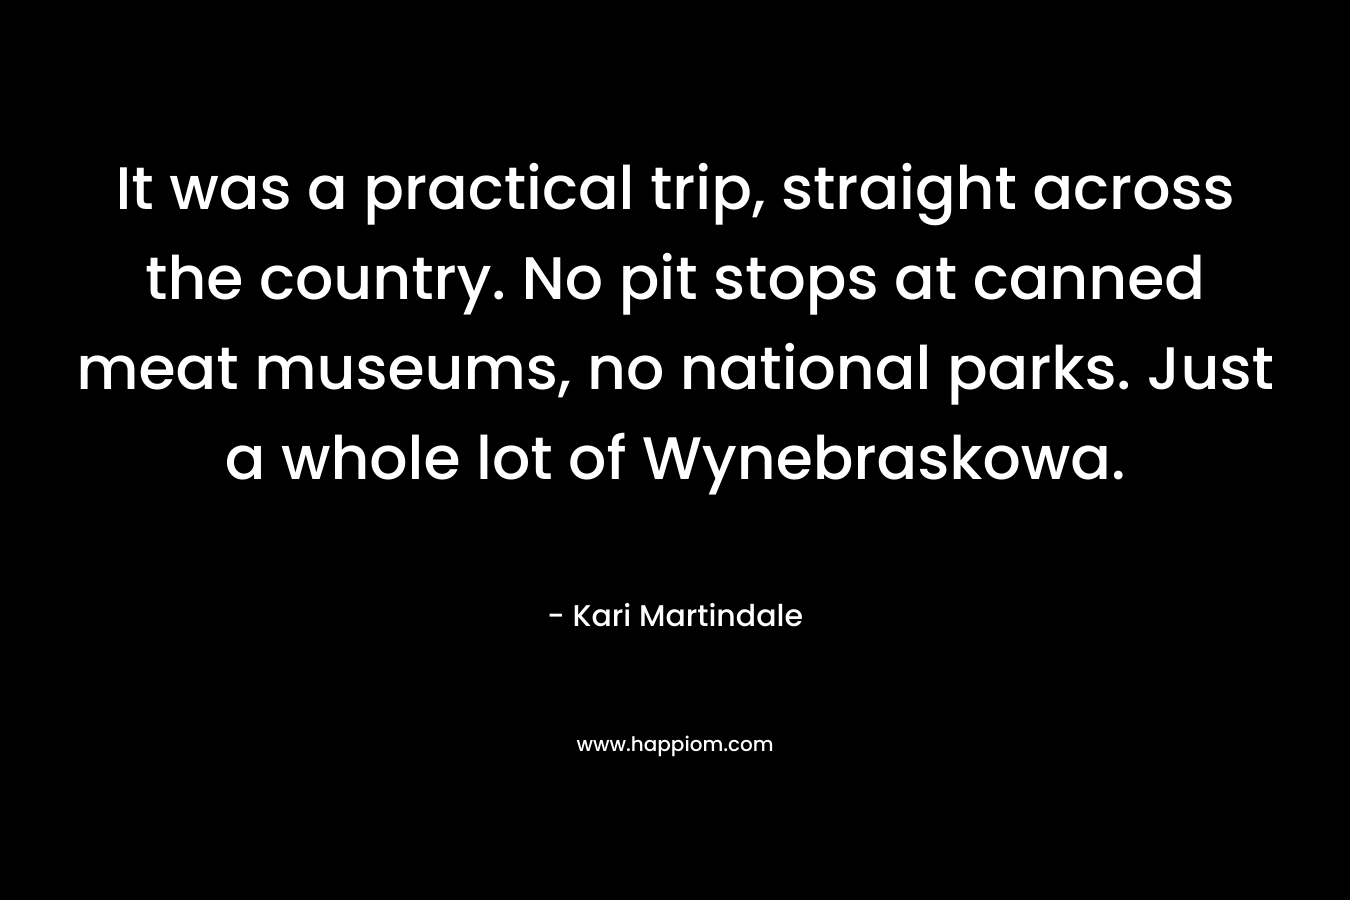 It was a practical trip, straight across the country. No pit stops at canned meat museums, no national parks. Just a whole lot of Wynebraskowa.